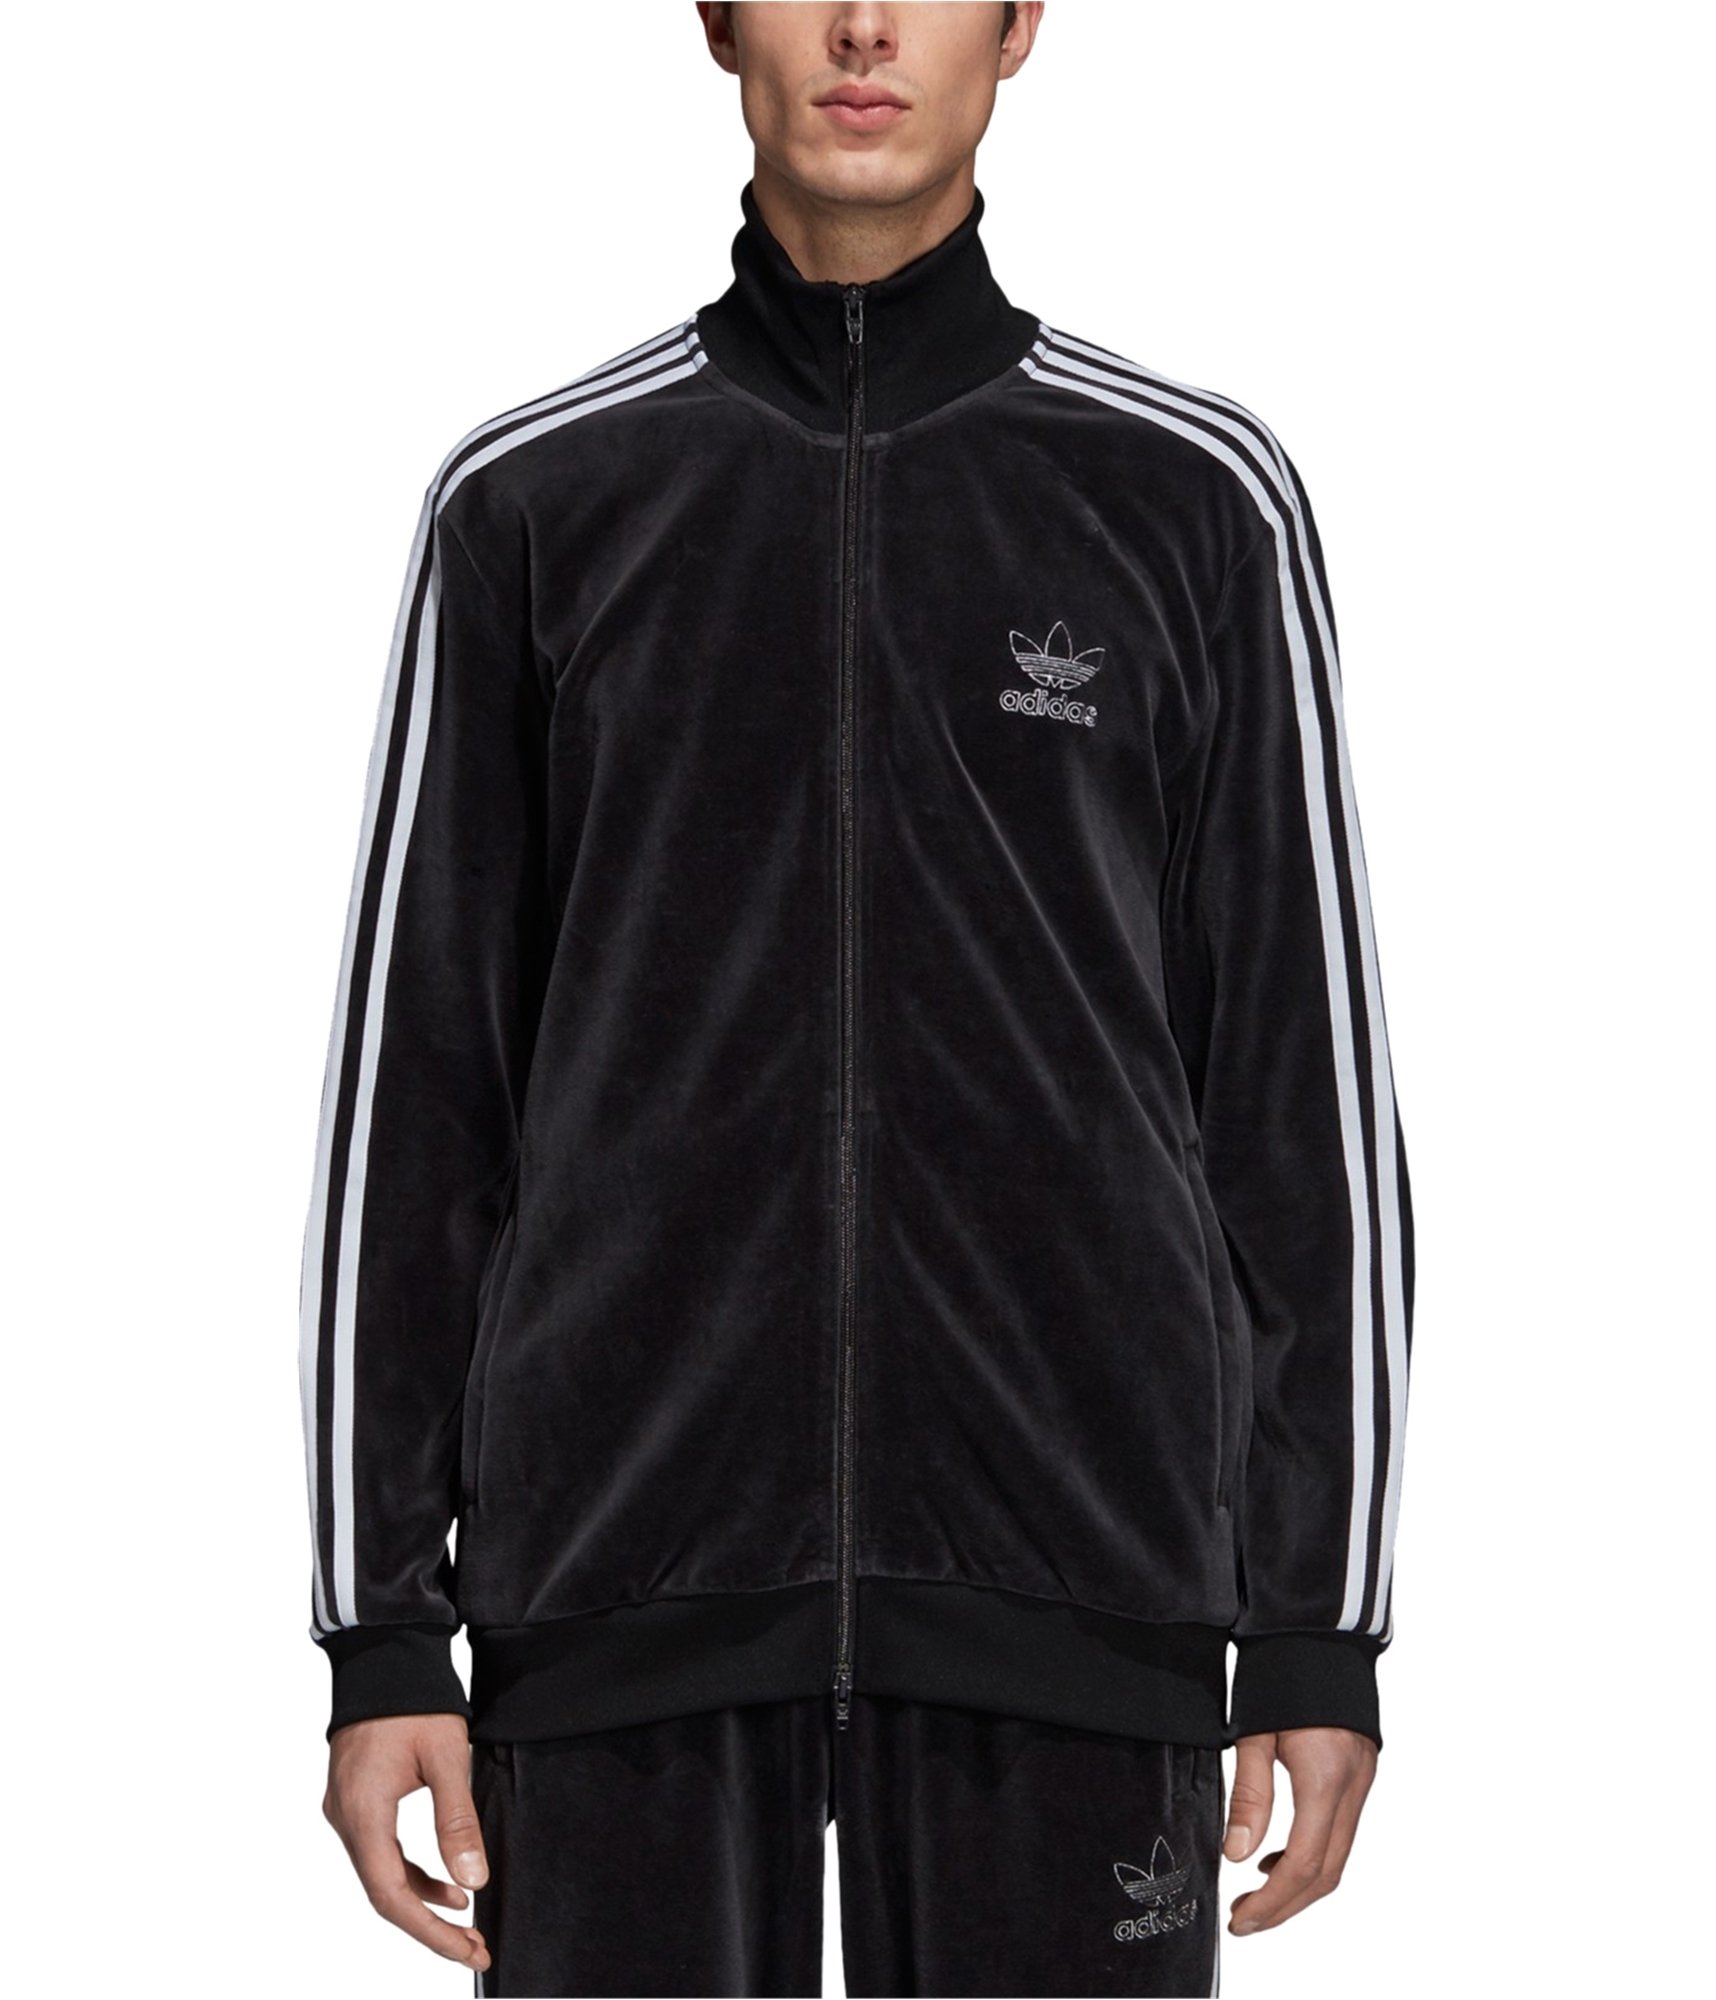 Buy a Adidas Velour Track Online TagsWeekly.com, TW2